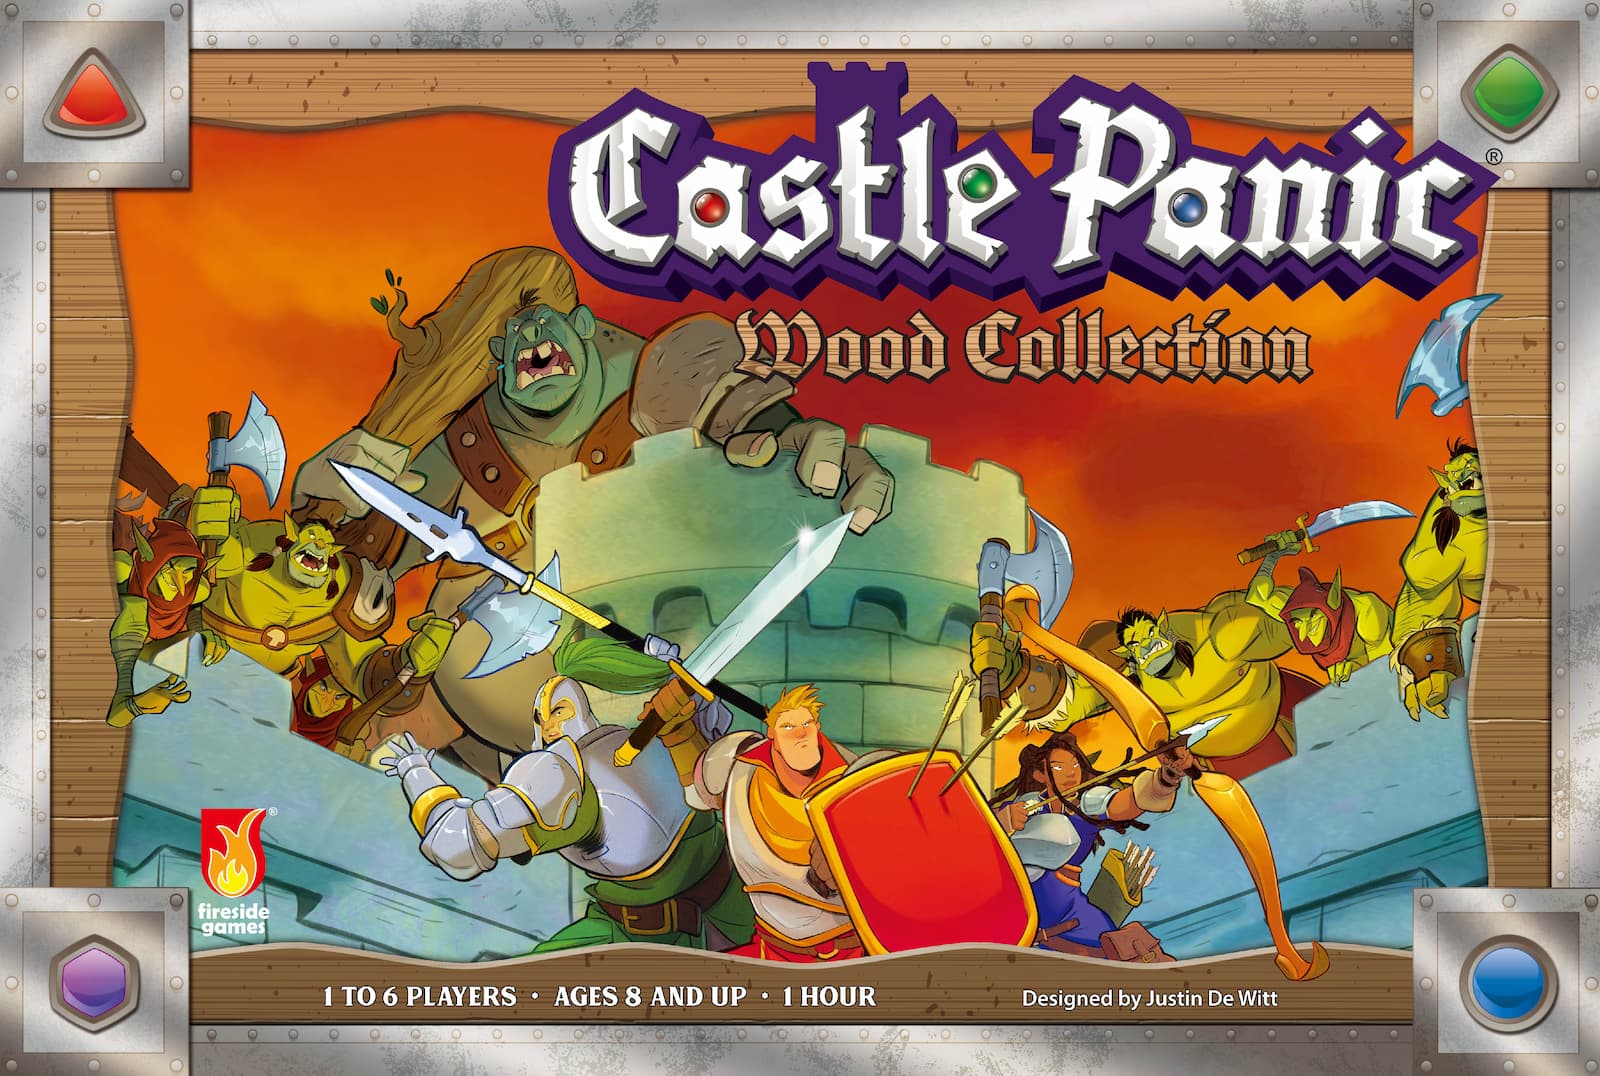 Castle Panic Wood Collection the board game was manufactured by Boda Games Manufacturing.